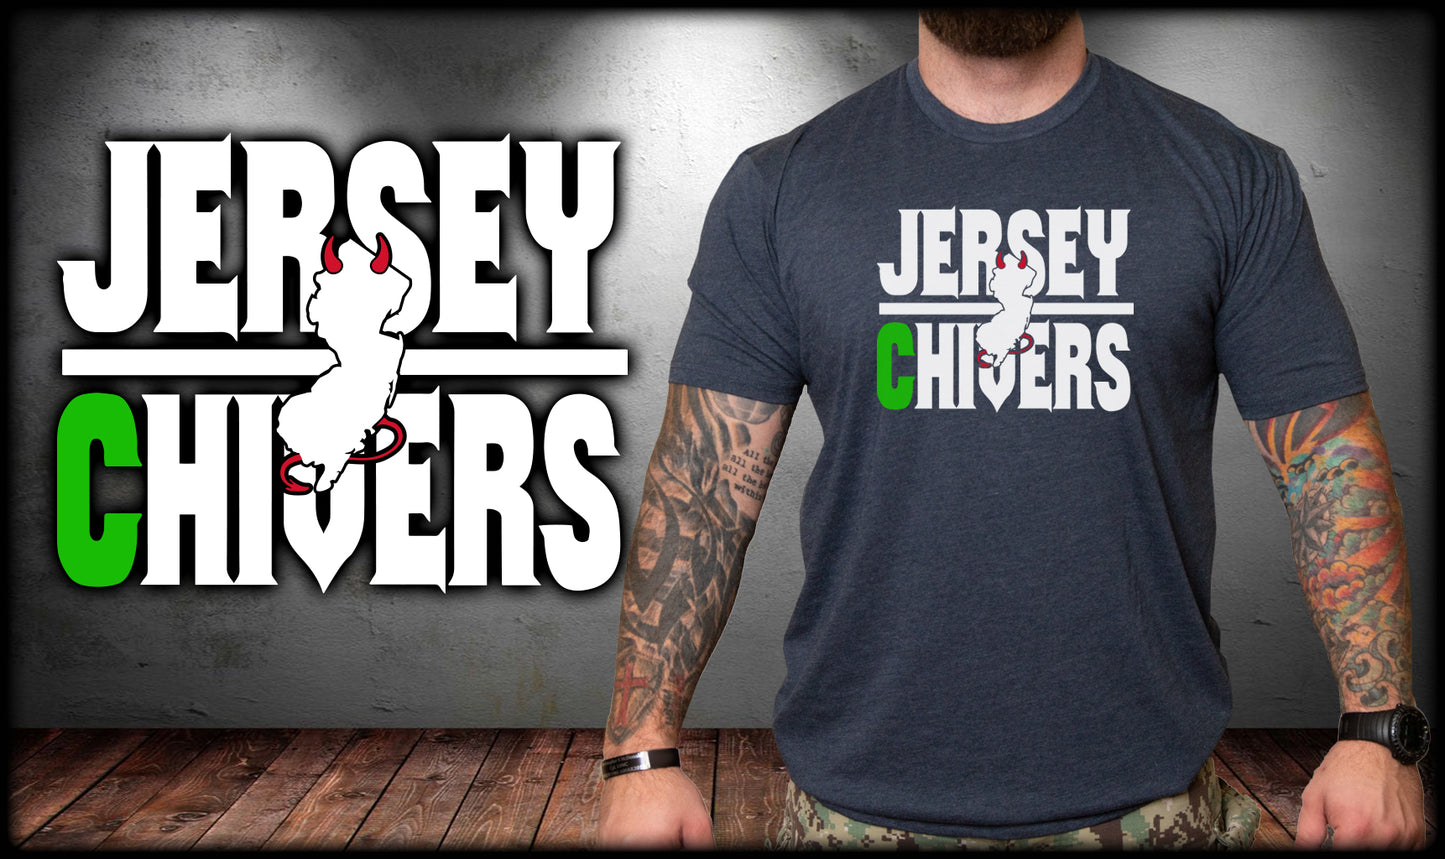 Jersey Devil Chivers